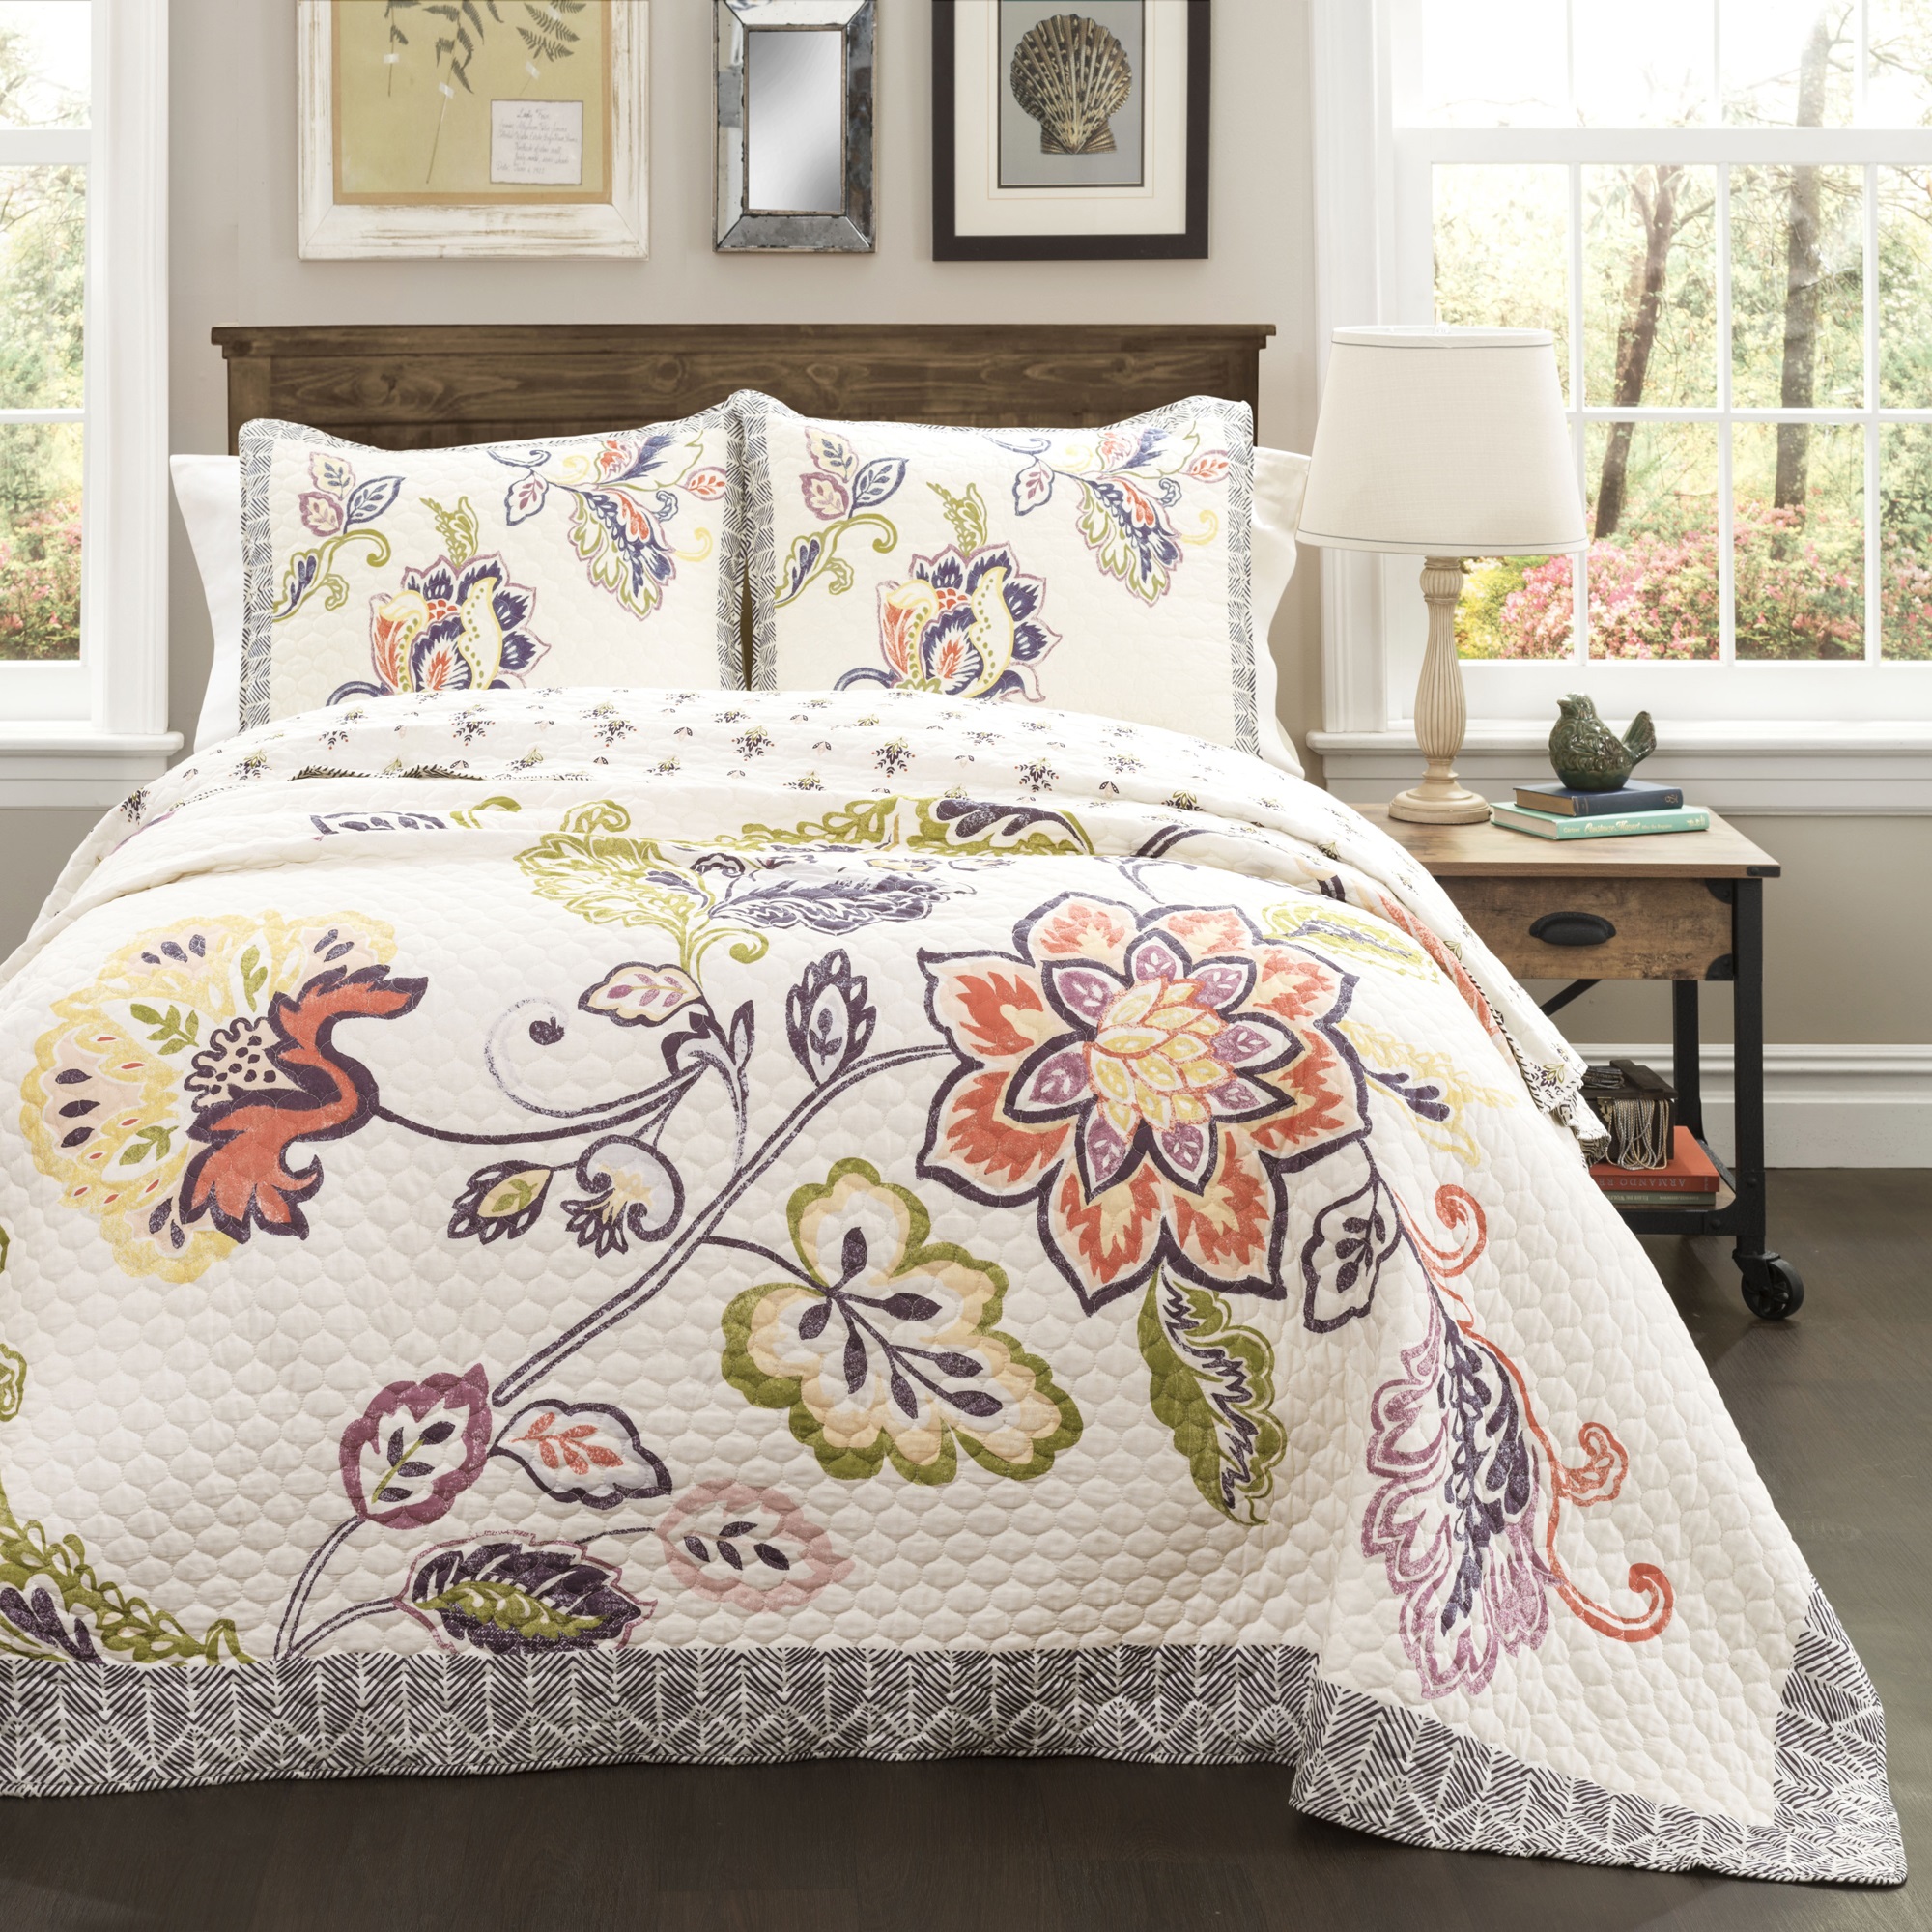 Lush Decor Aster Quilt Coral/ Navy 3pc Set Full/ Queen